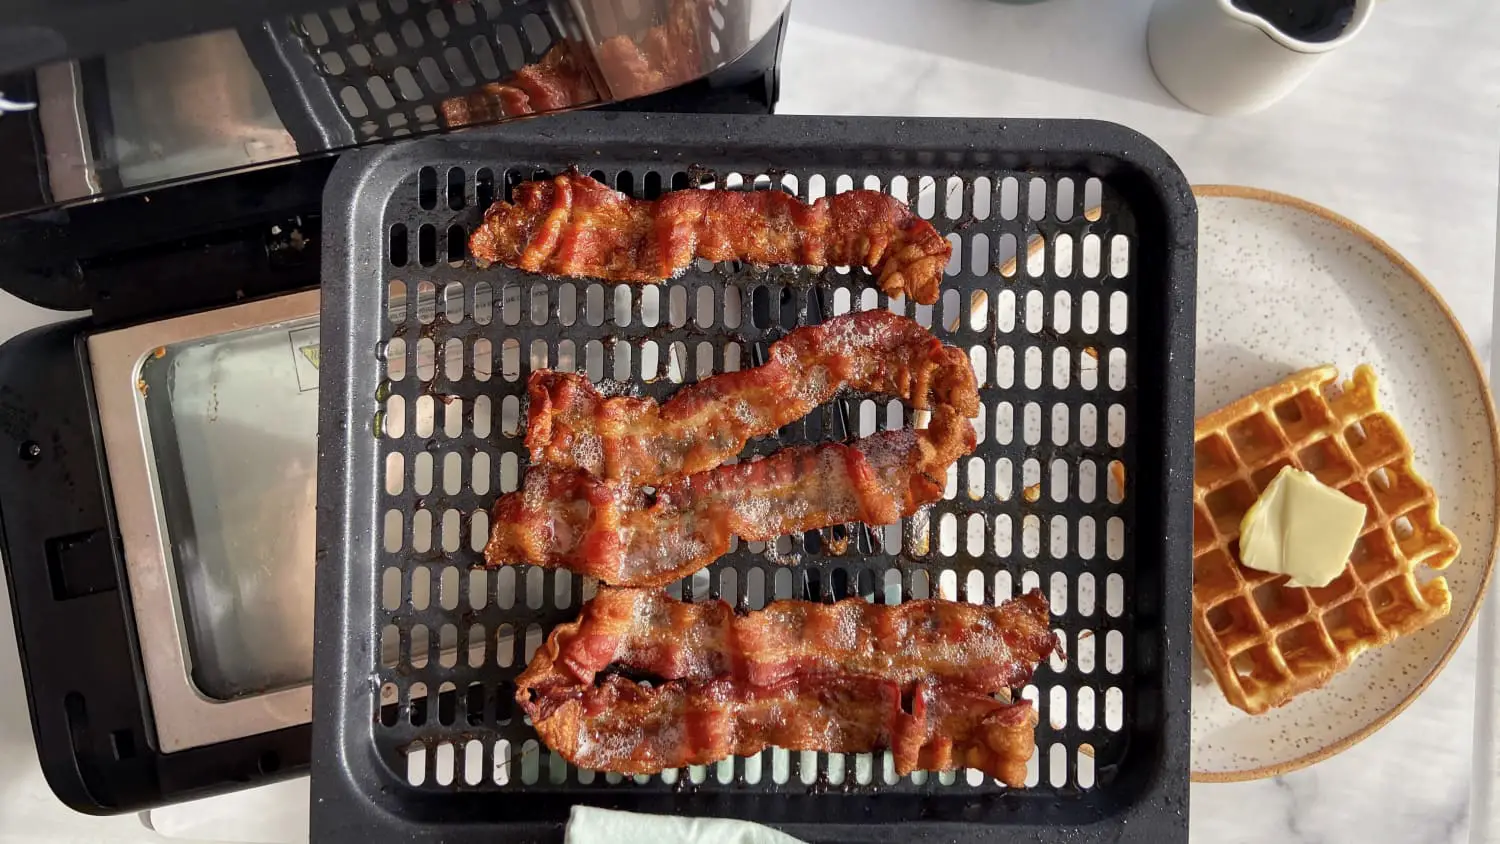 Can I use an Air Fryer to Cook Bacon?